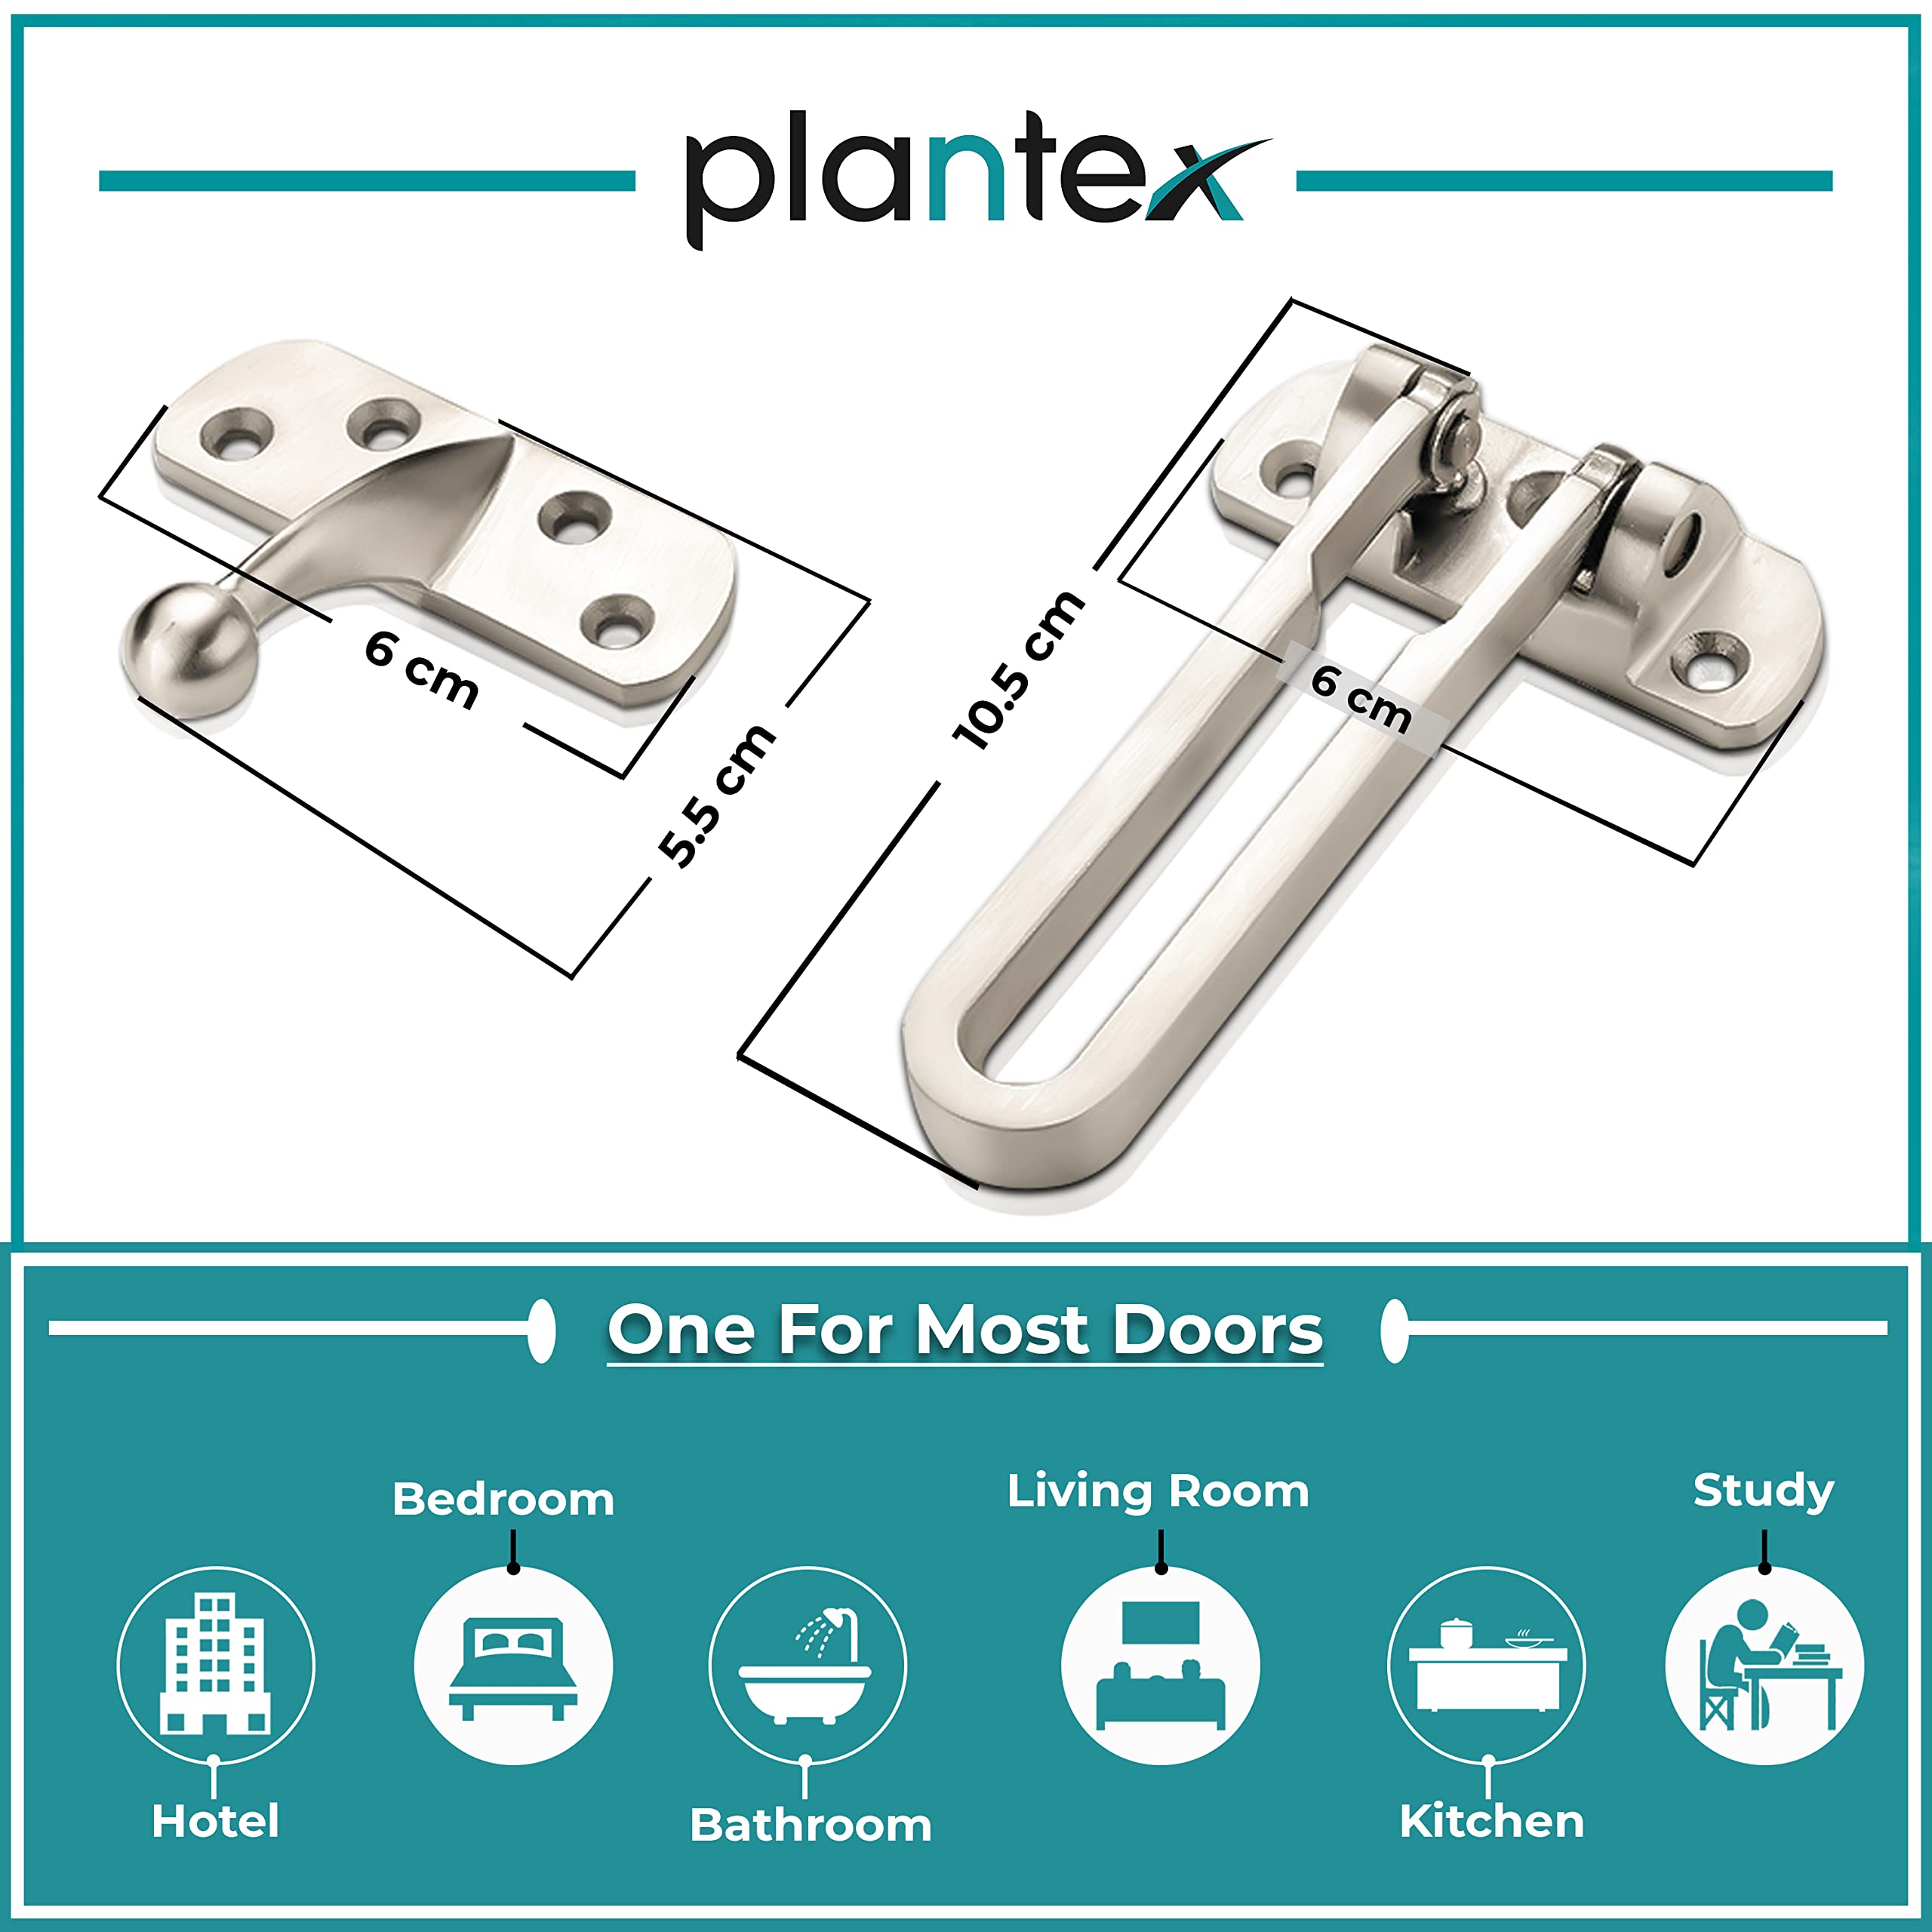 Plantex Heavy Duty Swing Bar Lock/Door Safety Guard with High Security Auxiliary Lock for Home/Office/Hotel – (SH-42, Matt Finish)